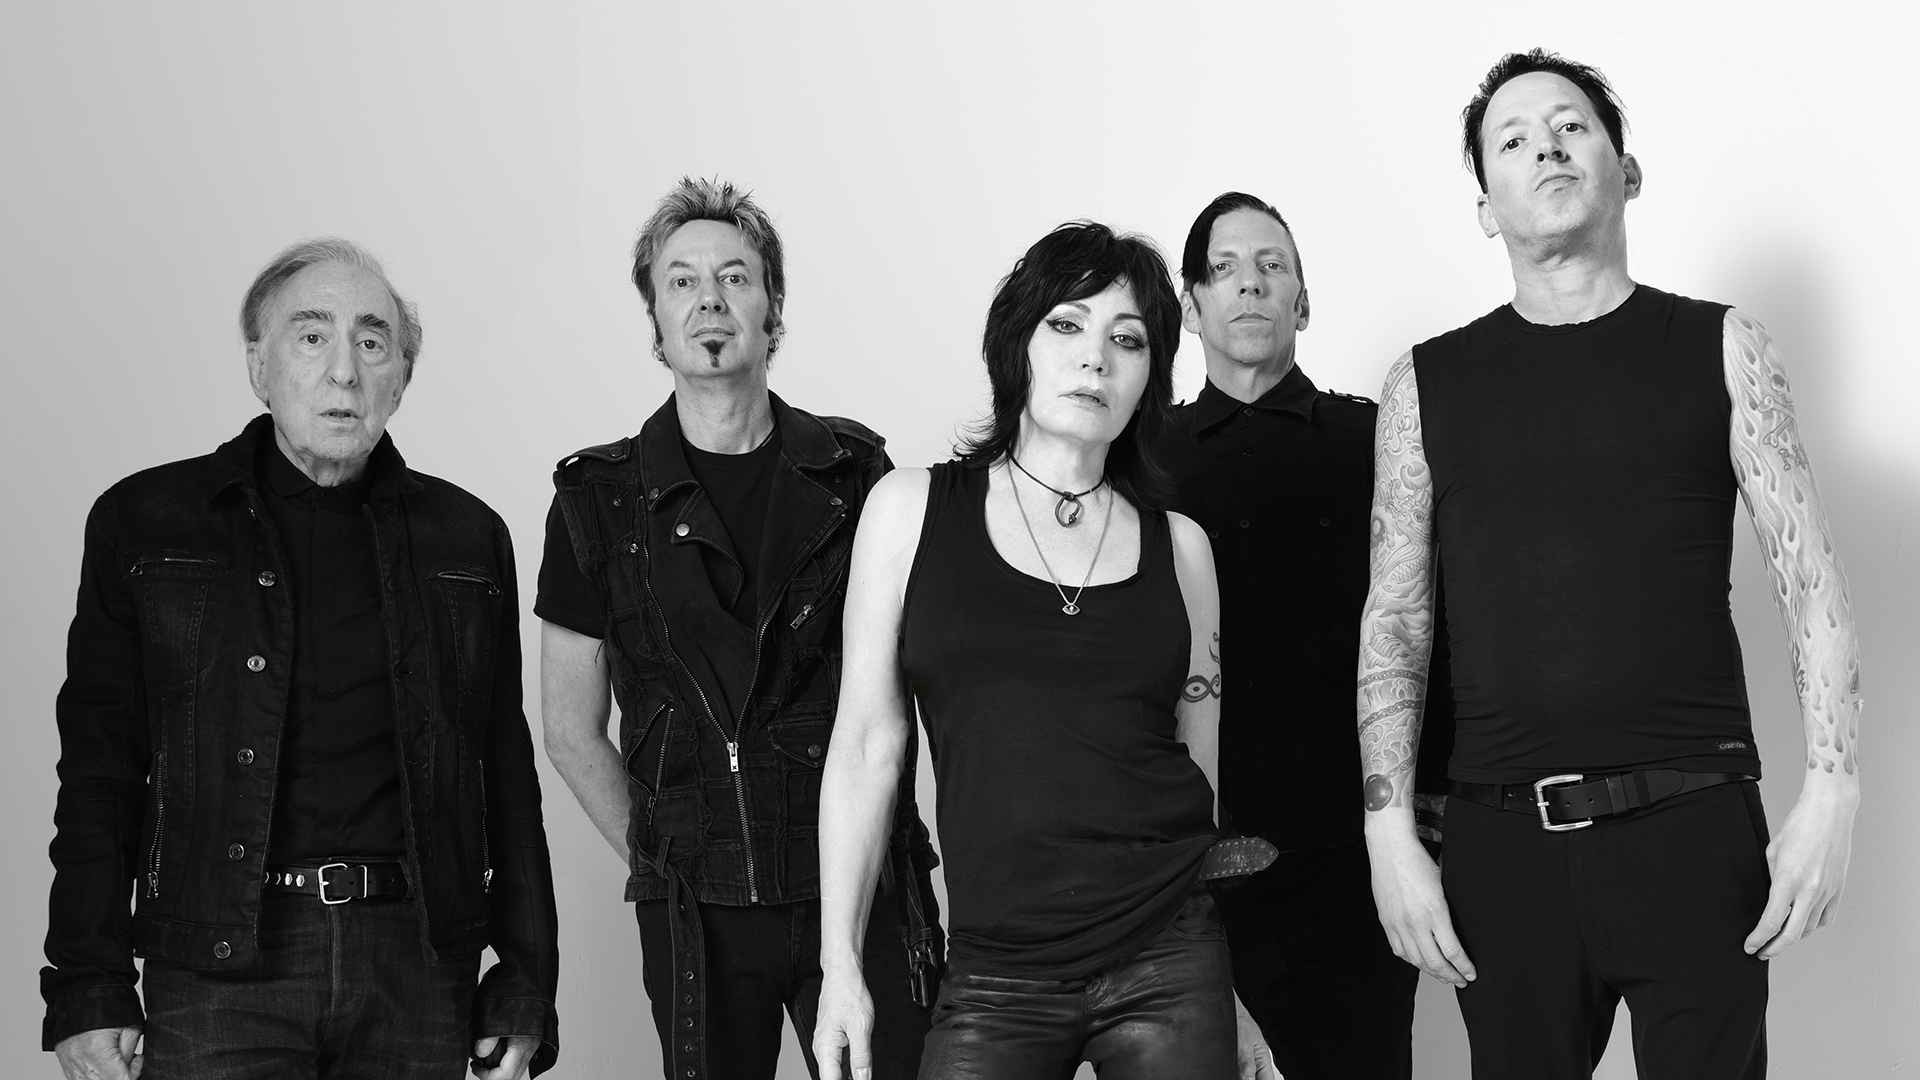 Joan Jett and the Blackhearts in Black and white